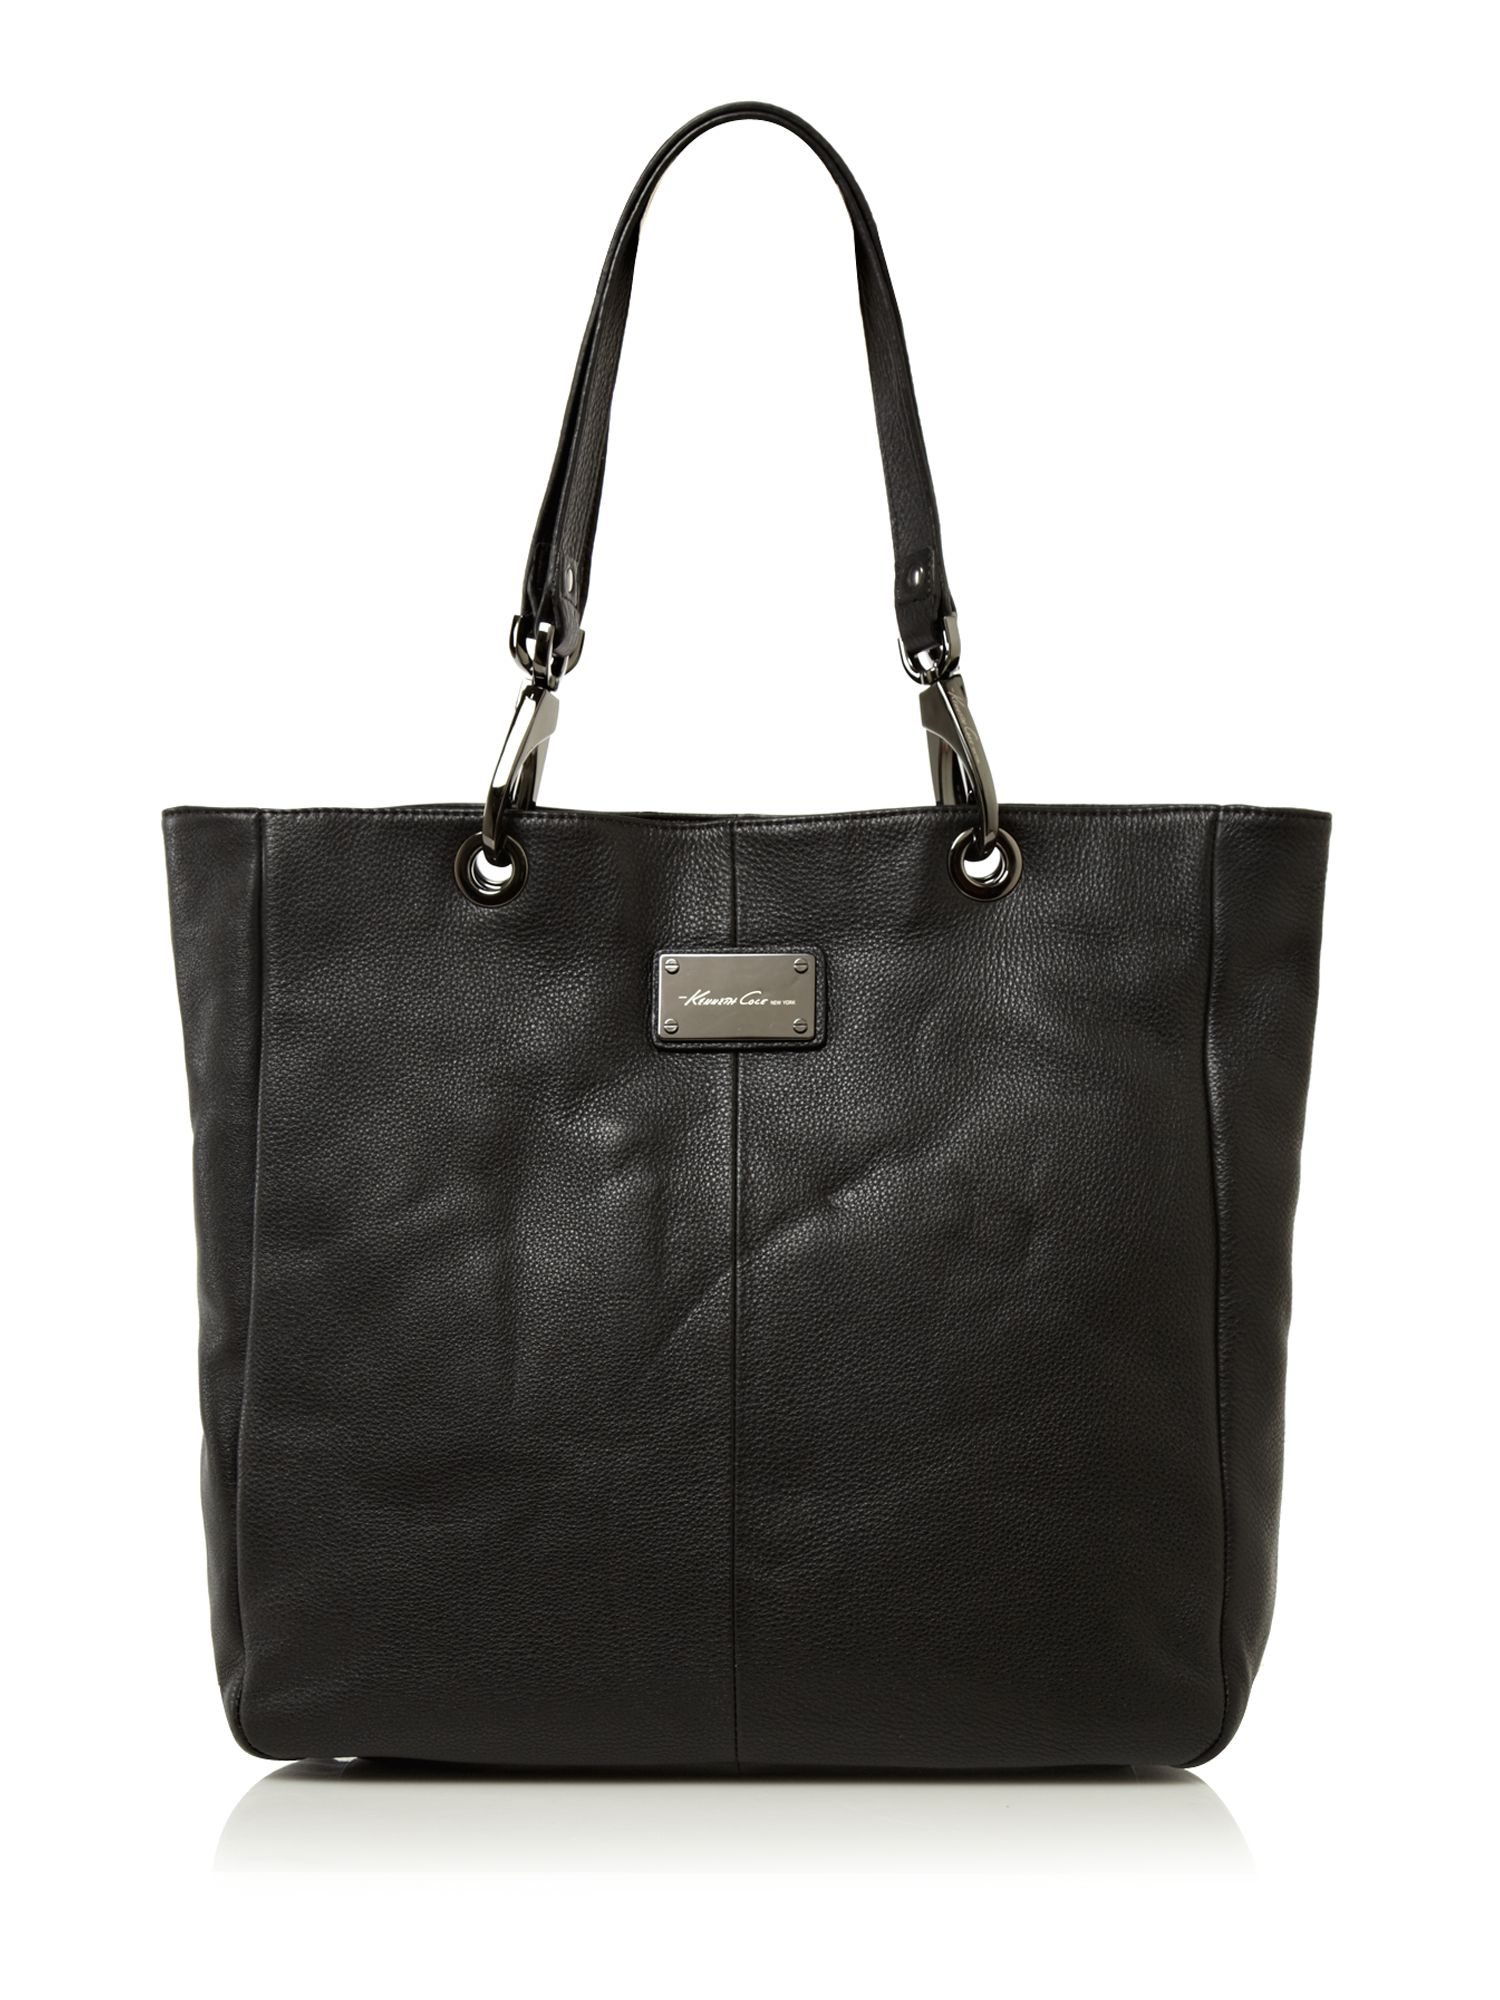 Kenneth Cole Tote Of The Town Large Tote Bag in Black | Lyst